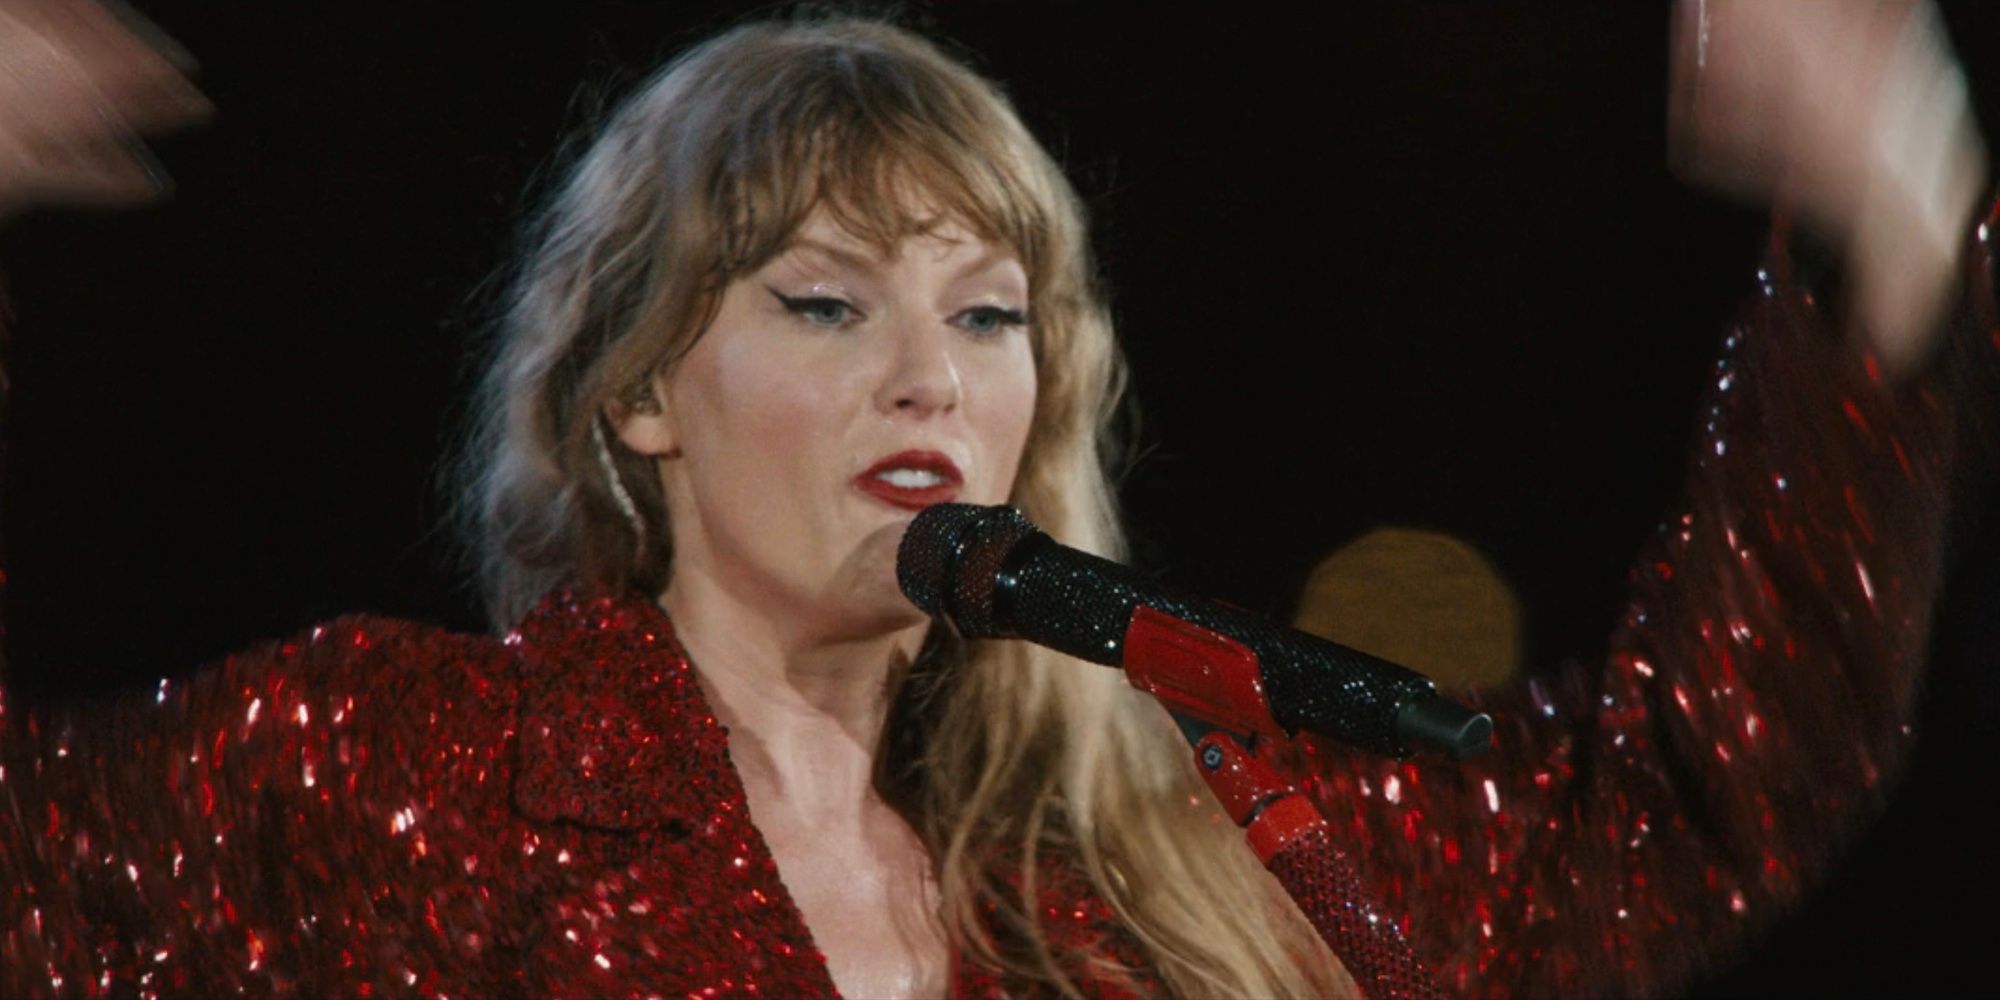 Taylor Swift performs "All Too Well (10 Minute Version)" in The Eras Tour movie.